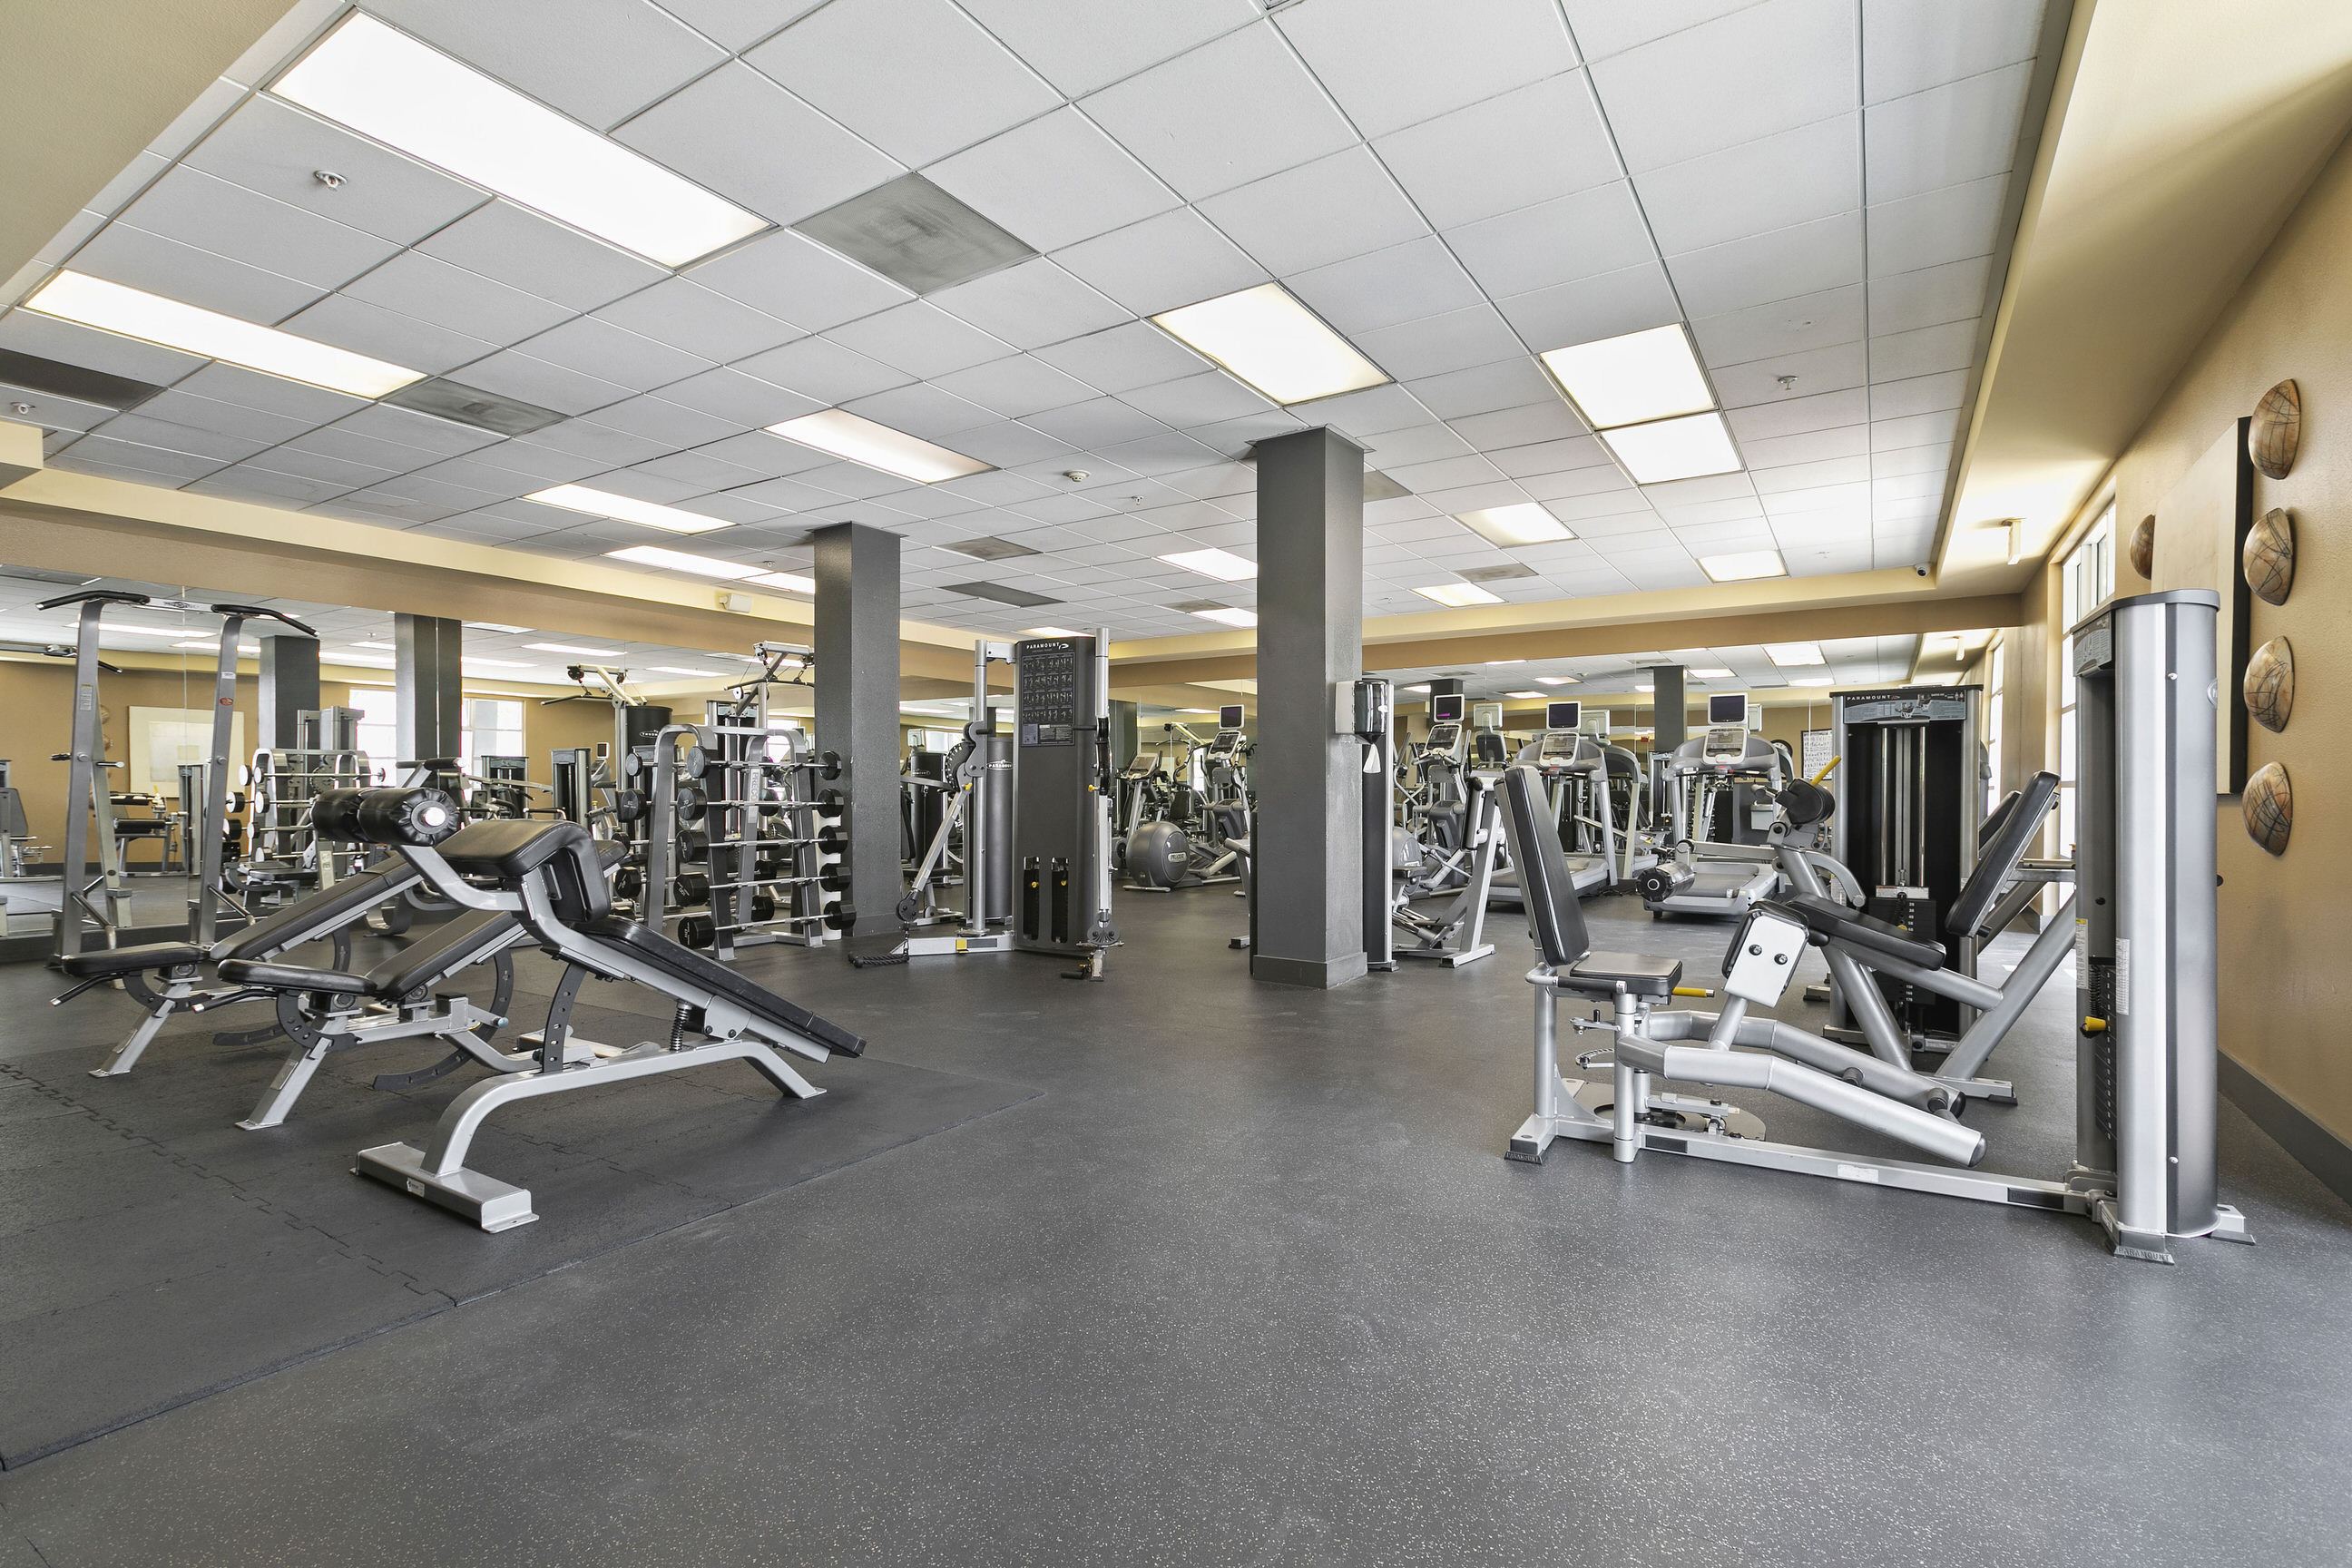 Photo of fitness center at Lofts at NoHo Commons Apartments in North Hollywood, Los Angeles.